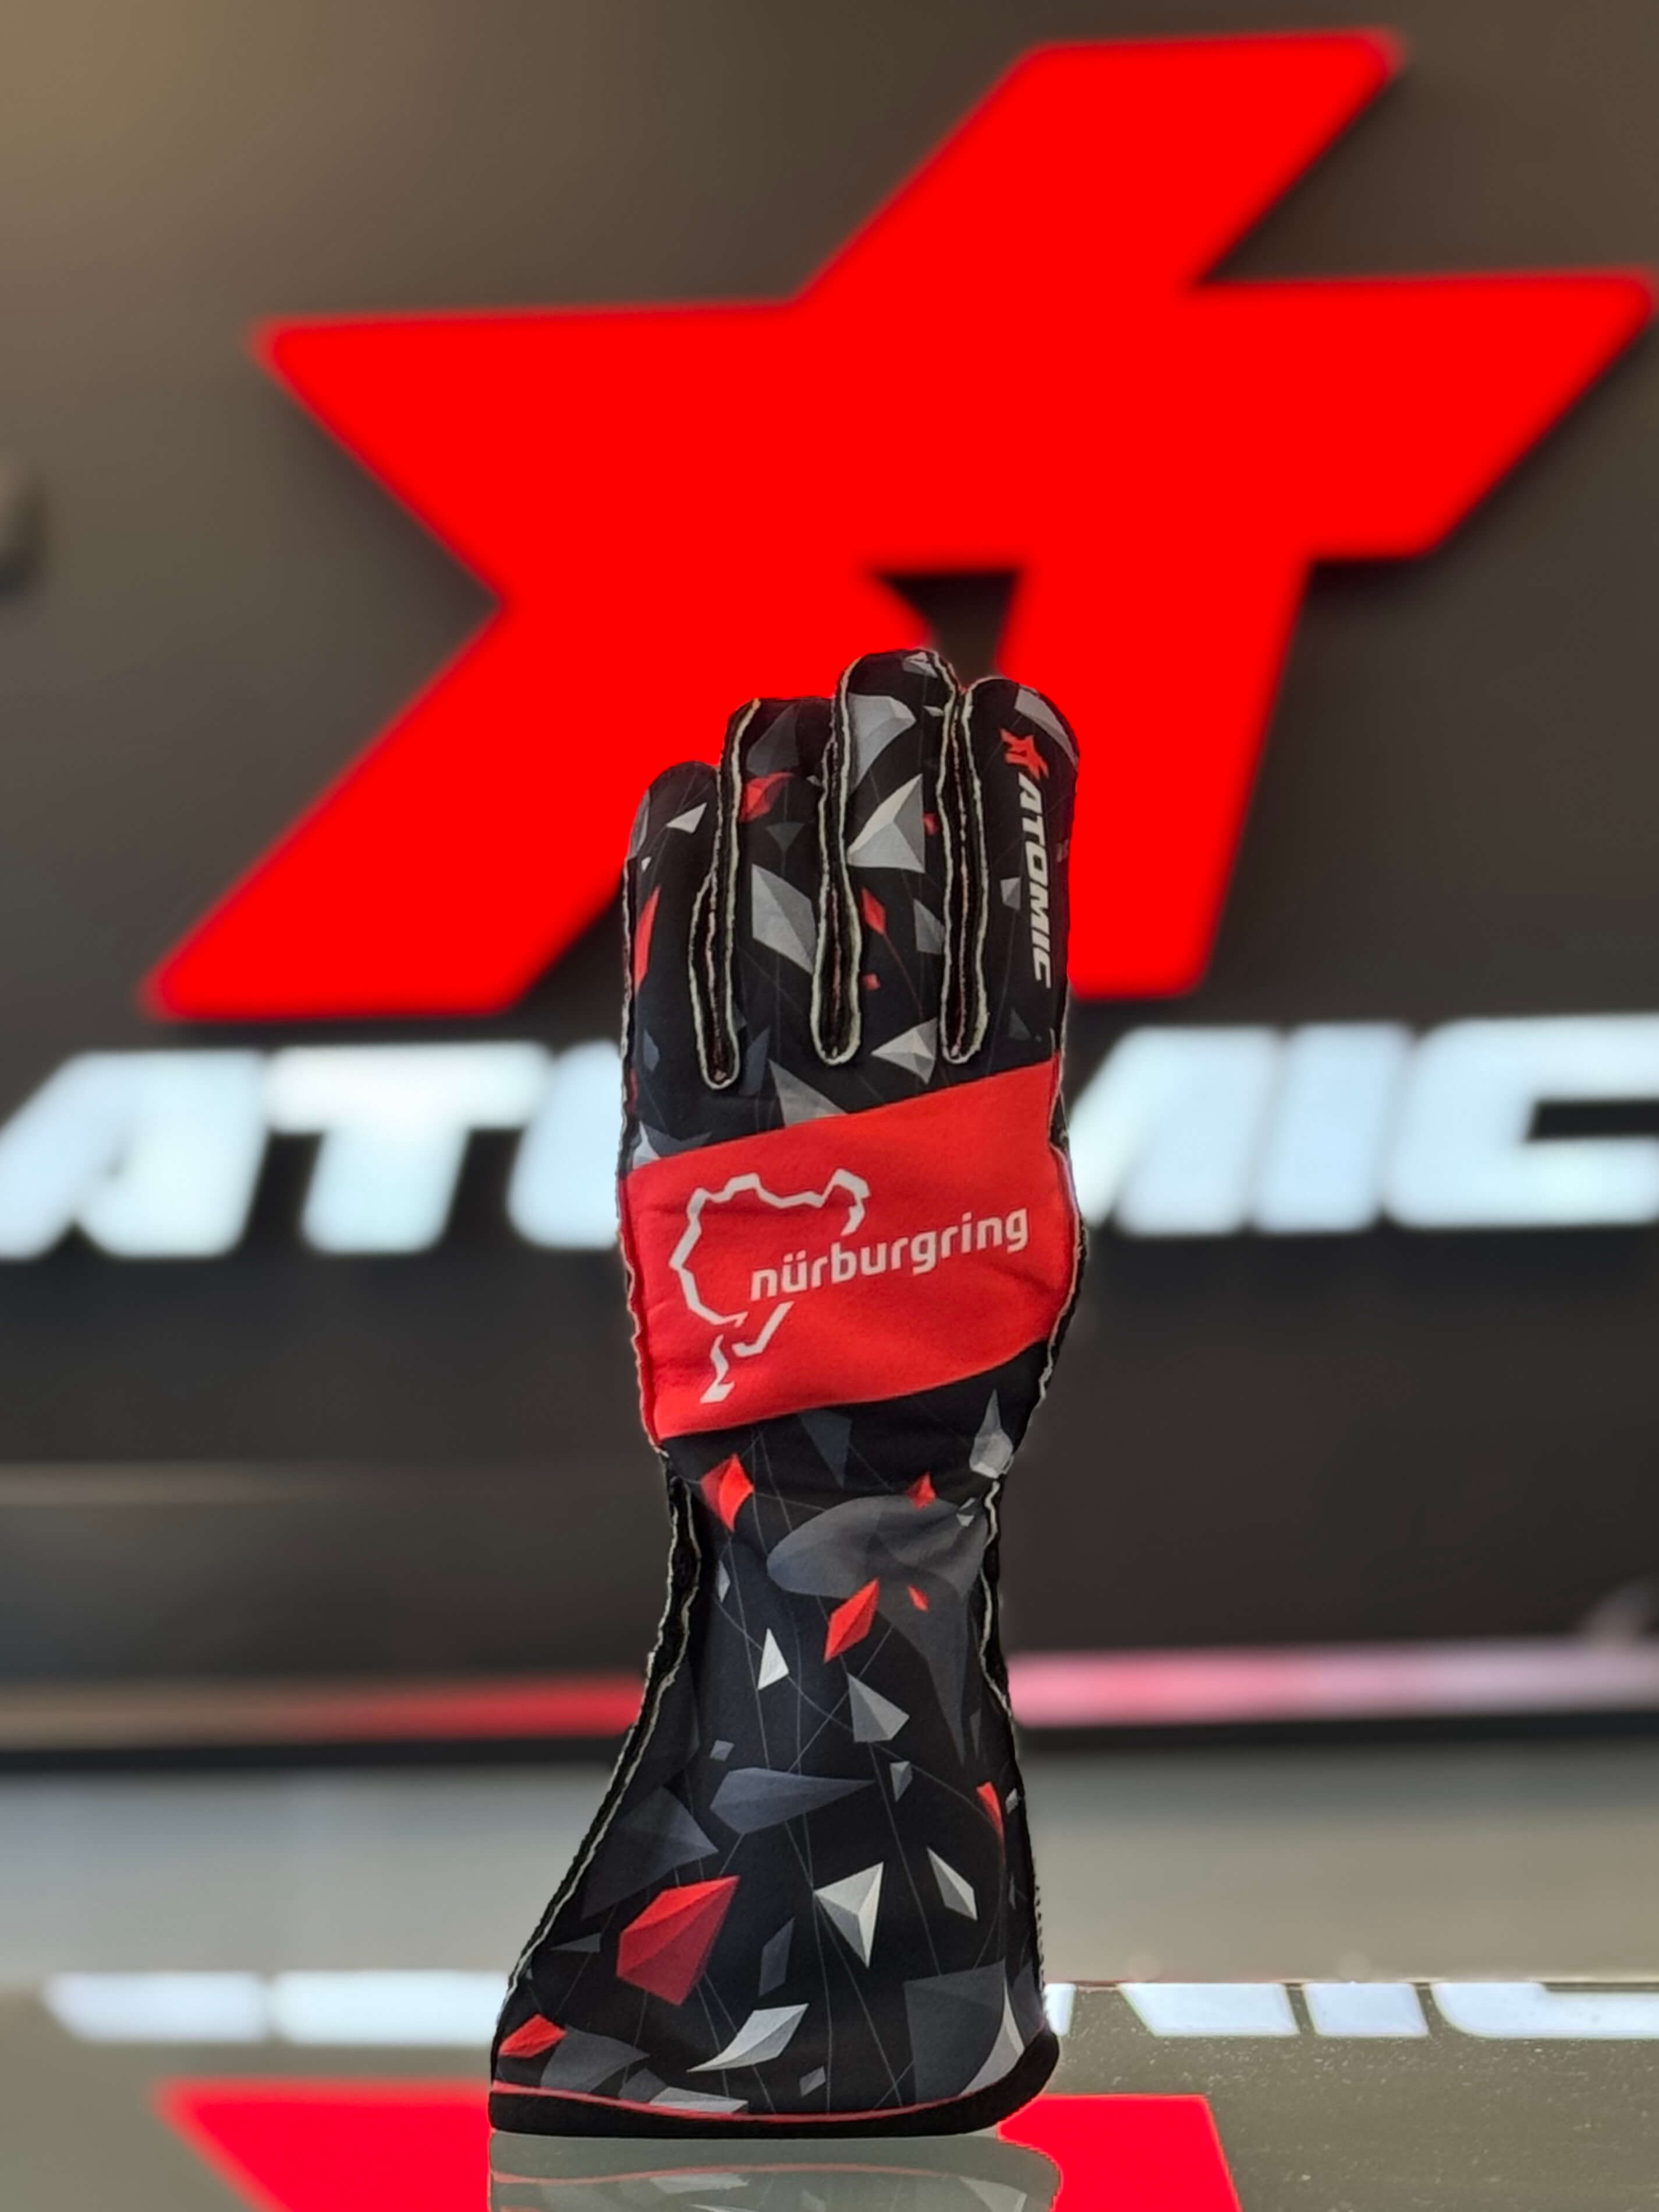 ARD R82-500-XL Racing Gloves Atomic Nürburgring Edition FIA 8856-2018 Black/Red Size XL (Officially Licensed Nürburgring Product) Photo-0 